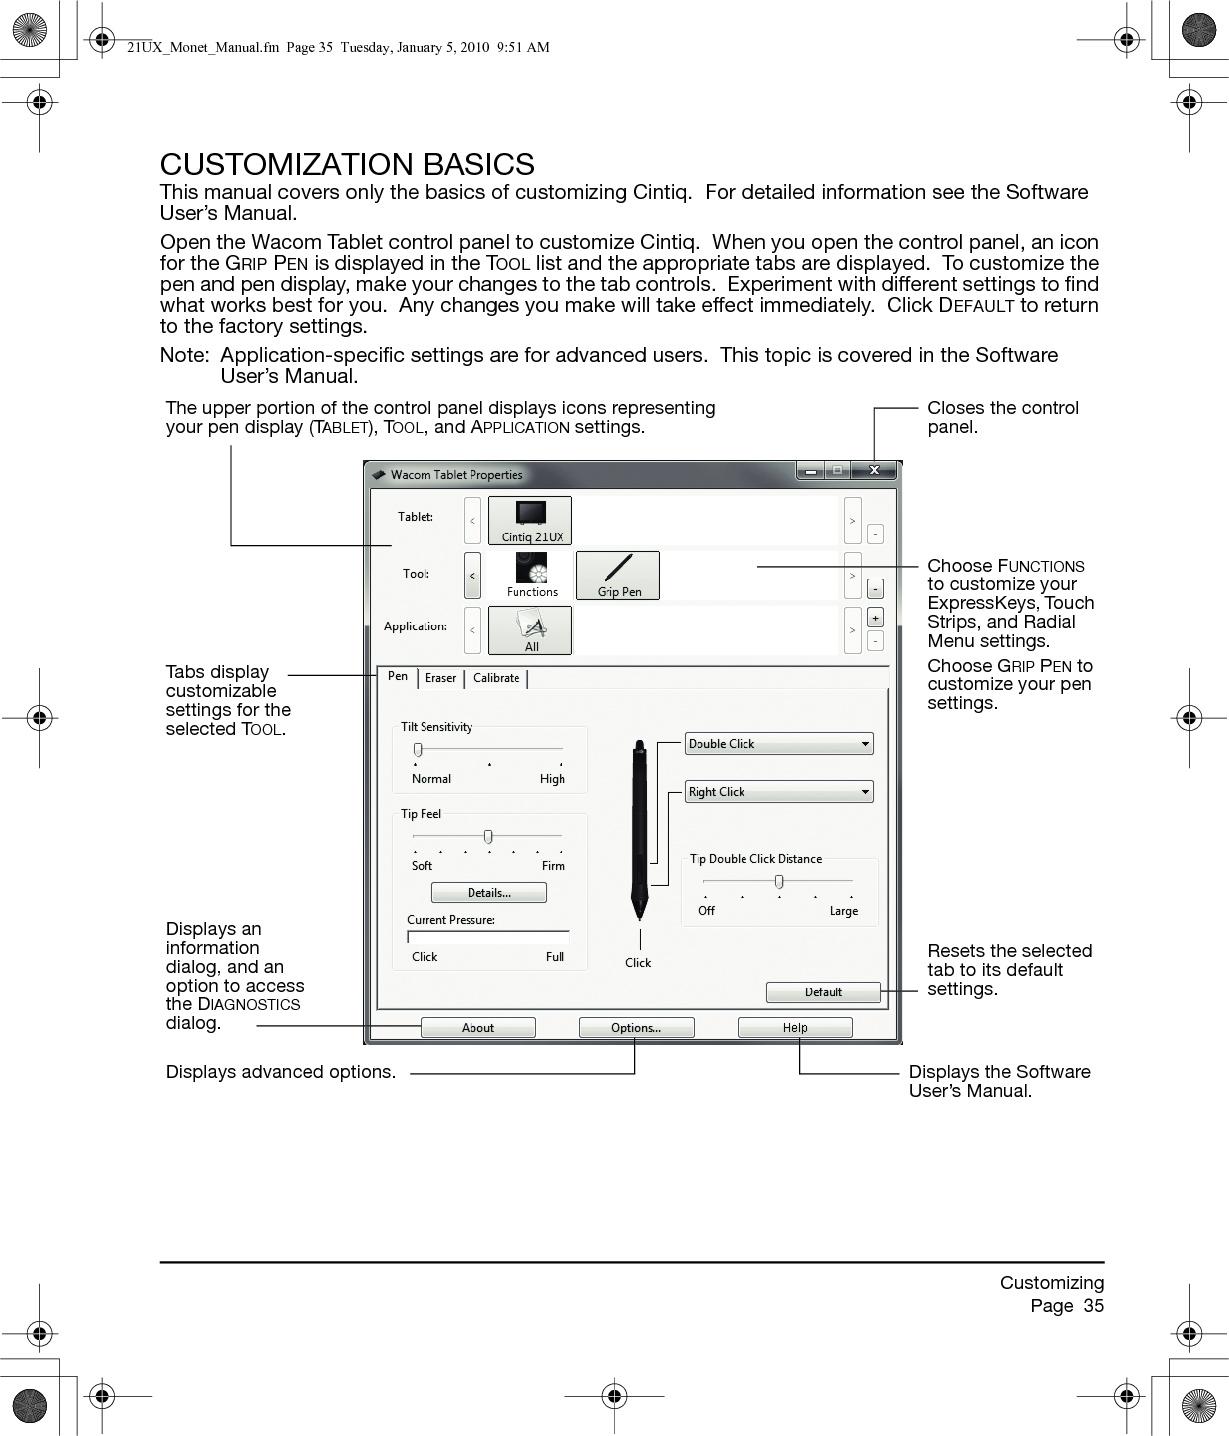 CustomizingPage  35CUSTOMIZATION BASICSThis manual covers only the basics of customizing Cintiq.  For detailed information see the Software User’s Manual.Open the Wacom Tablet control panel to customize Cintiq.  When you open the control panel, an icon for the GRIP PEN is displayed in the TOOL list and the appropriate tabs are displayed.  To customize the pen and pen display, make your changes to the tab controls.  Experiment with different settings to find what works best for you.  Any changes you make will take effect immediately.  Click DEFAULT to return to the factory settings.Note:  Application-specific settings are for advanced users.  This topic is covered in the Software User’s Manual.The upper portion of the control panel displays icons representing your pen display (TABLET), TOOL, and APPLICATION settings.Closes the control panel.Tabs display customizable settings for the selected TOOL.Choose FUNCTIONS to customize your ExpressKeys, Touch Strips, and Radial Menu settings.Choose GRIP PEN to customize your pen settings.Displays an information dialog, and an option to access the DIAGNOSTICS dialog.Resets the selected tab to its default settings.Displays advanced options. Displays the Software User’s Manual.21UX_Monet_Manual.fm  Page 35  Tuesday, January 5, 2010  9:51 AM